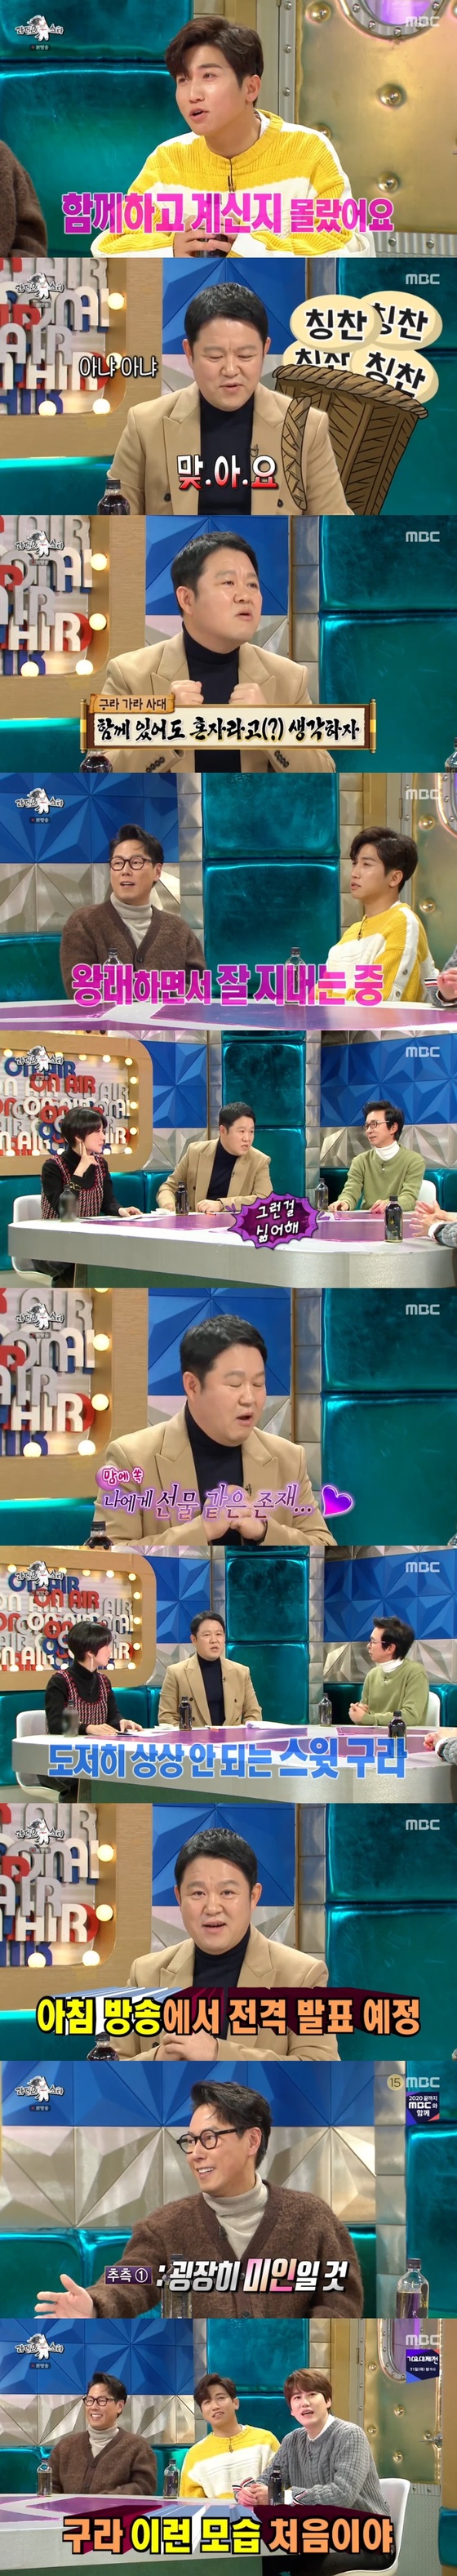 [RE:TV] The reason for “Las” Kim Gura “Girlfriend broadcasts NO… exists like a gift”